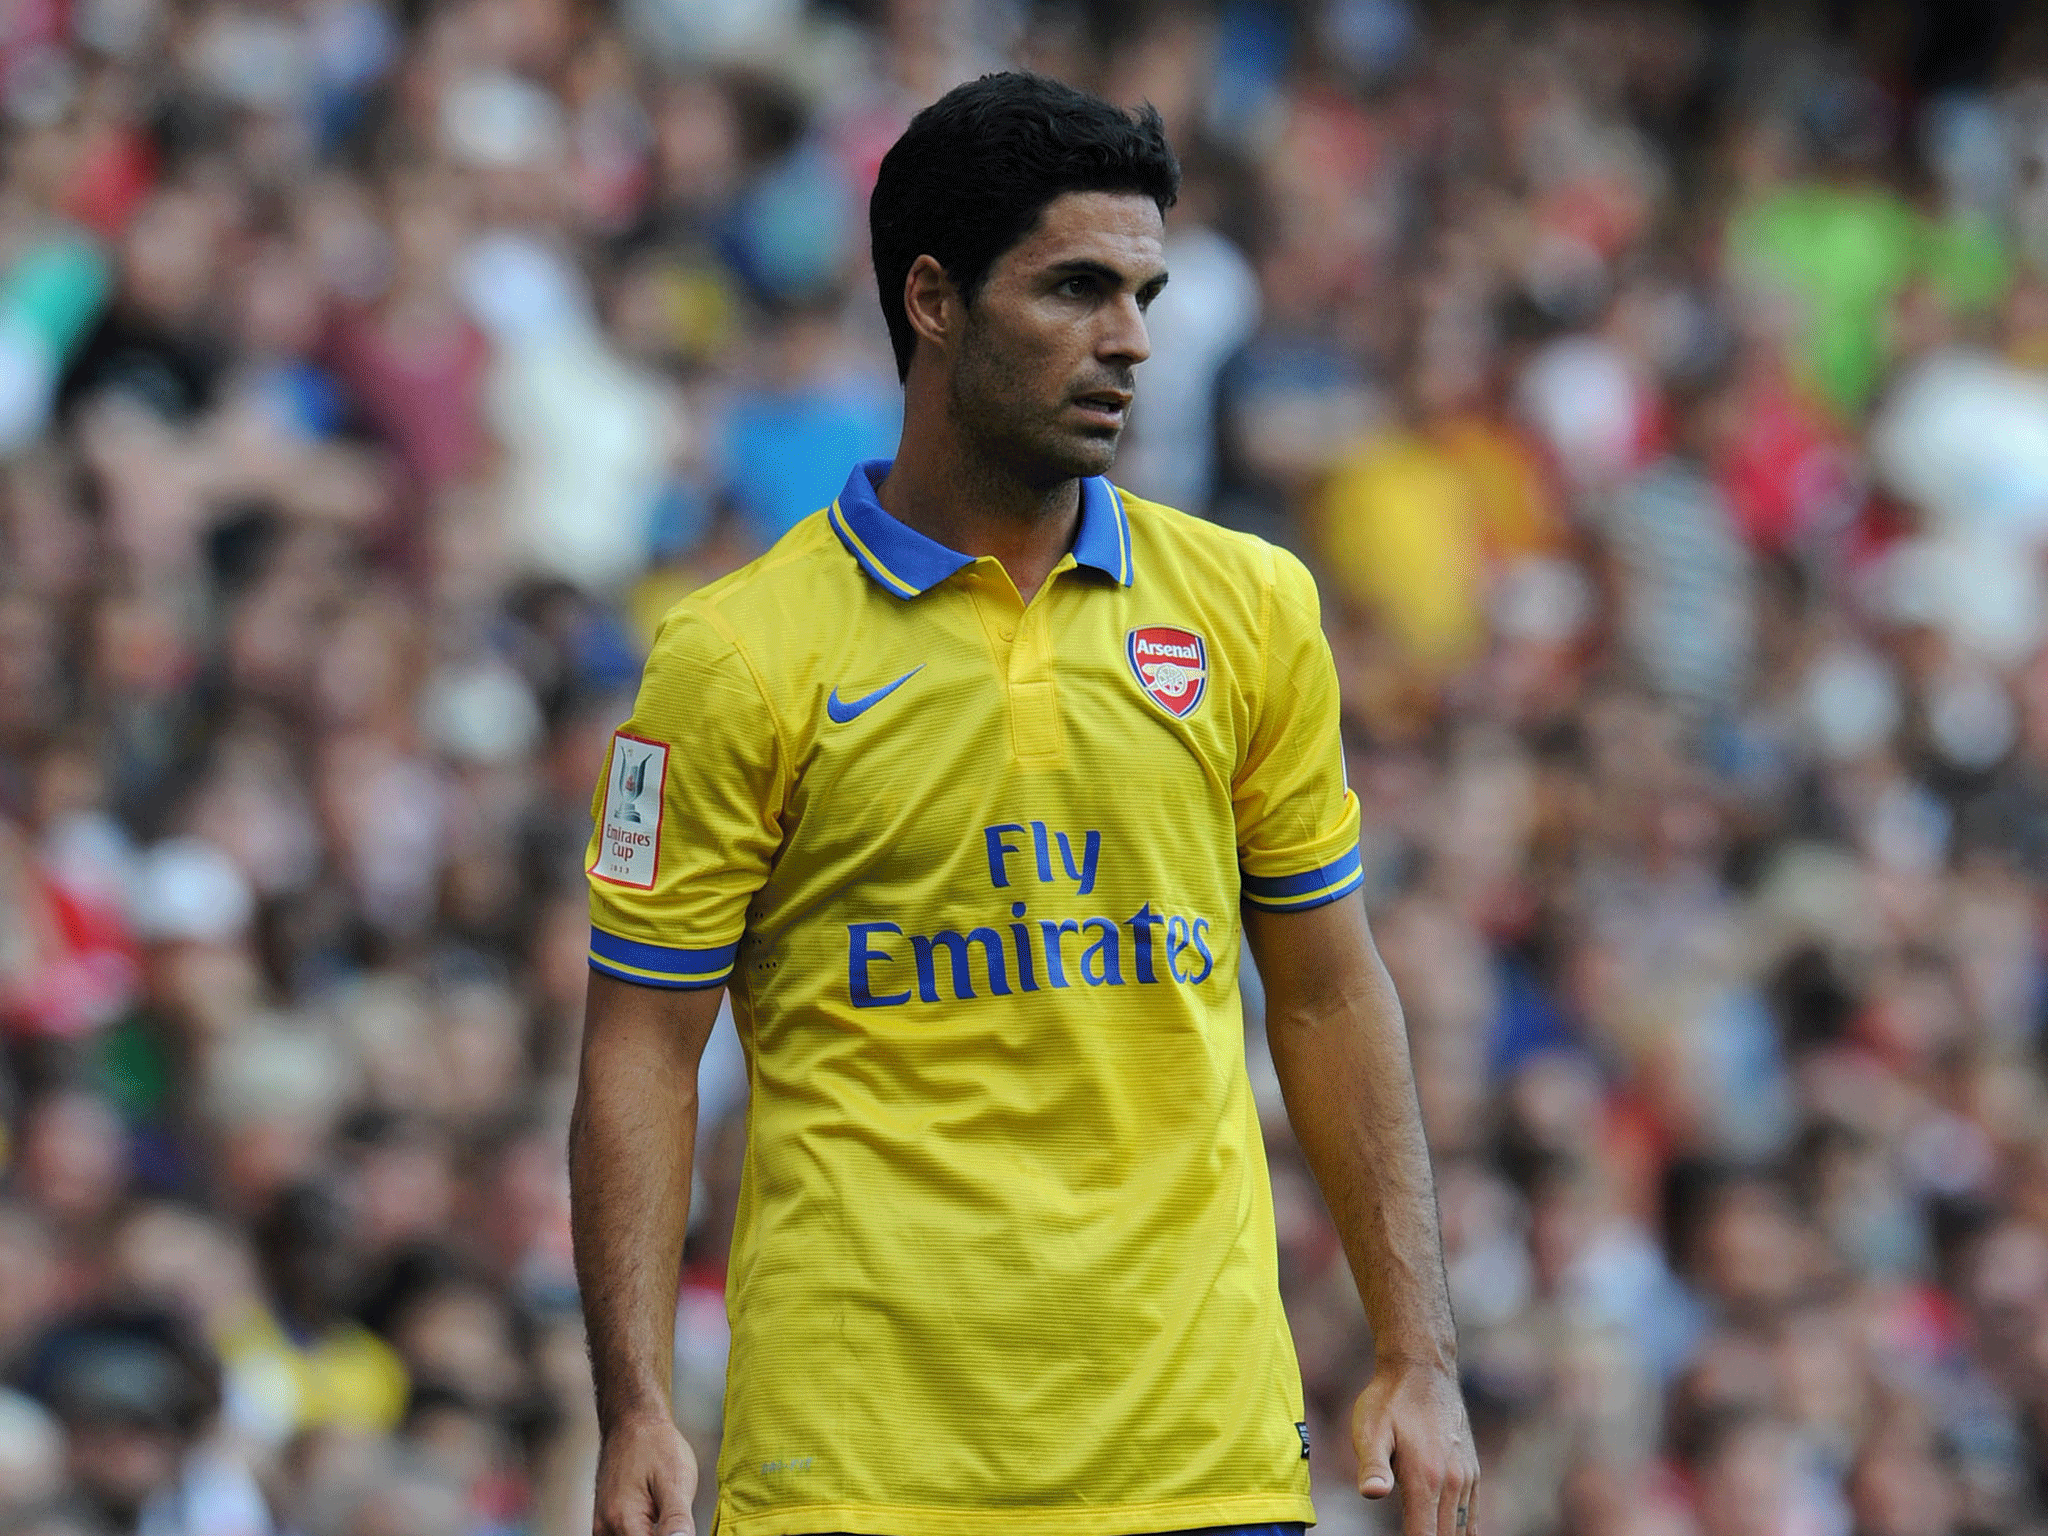 Mikel Arteta has been ruled out of Arsenal's opener against Aston Villa and could face six weeks on the sidelines